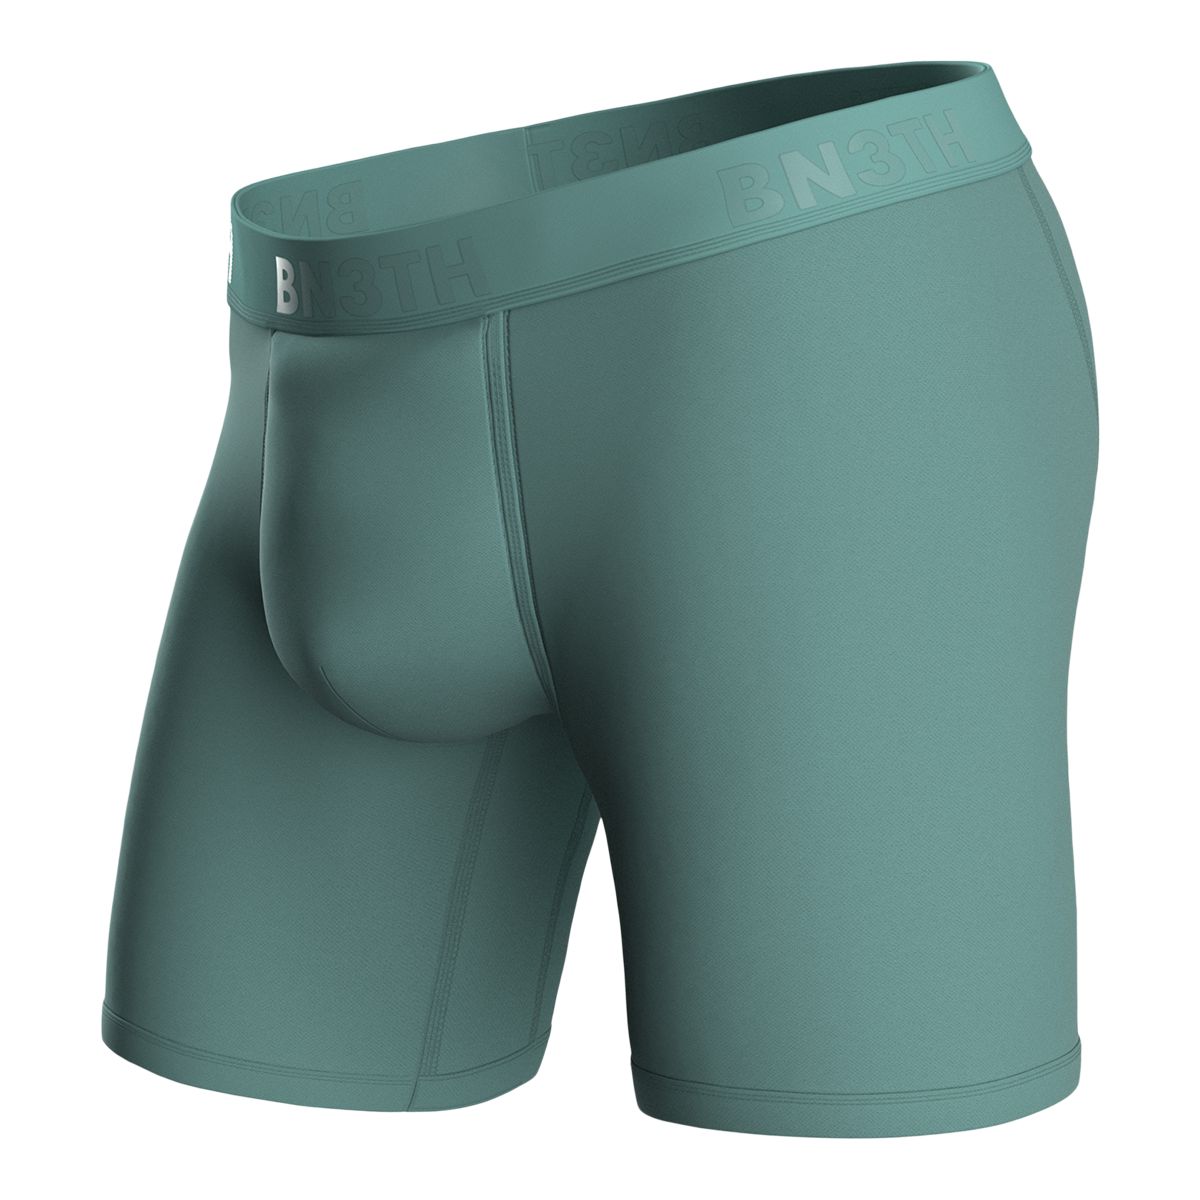 https://media-www.sportchek.ca/product/div-03-softgoods/dpt-79-clothing-accessories/sdpt-01-mens/334030986/bn3th-men-s-breathe-classic-boxer-brief-467c56a9-951a-4629-81cf-0946aad037dc-jpgrendition.jpg